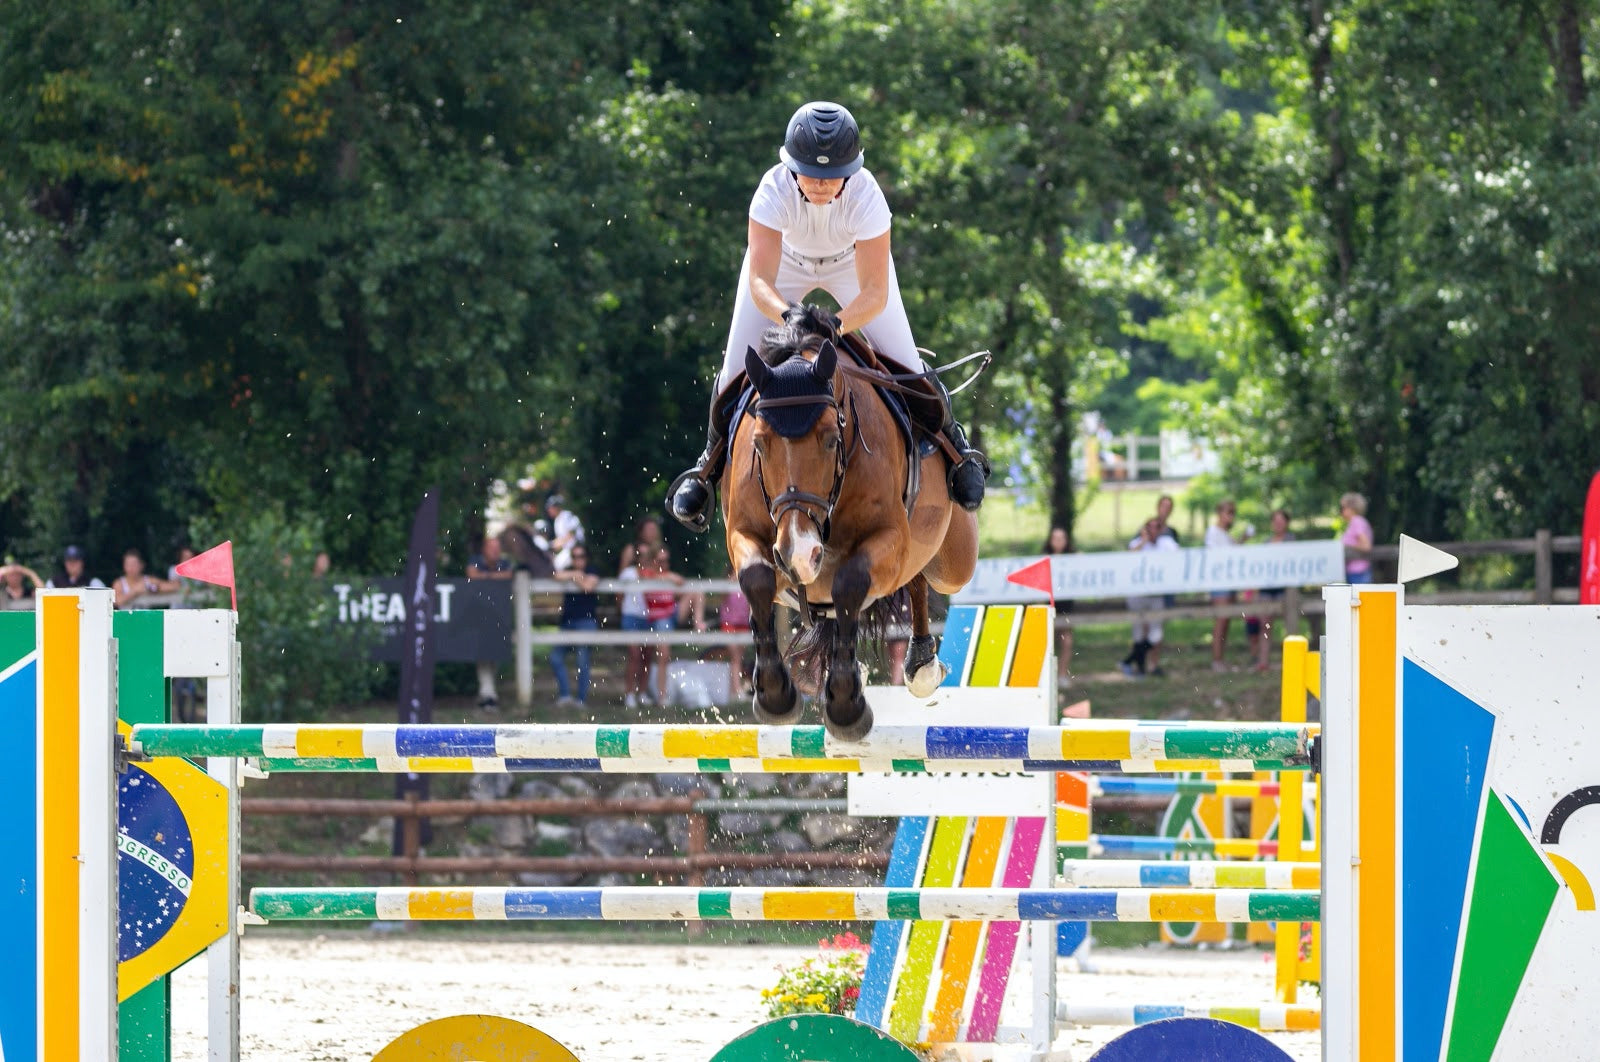 Show Jumping at a Glance